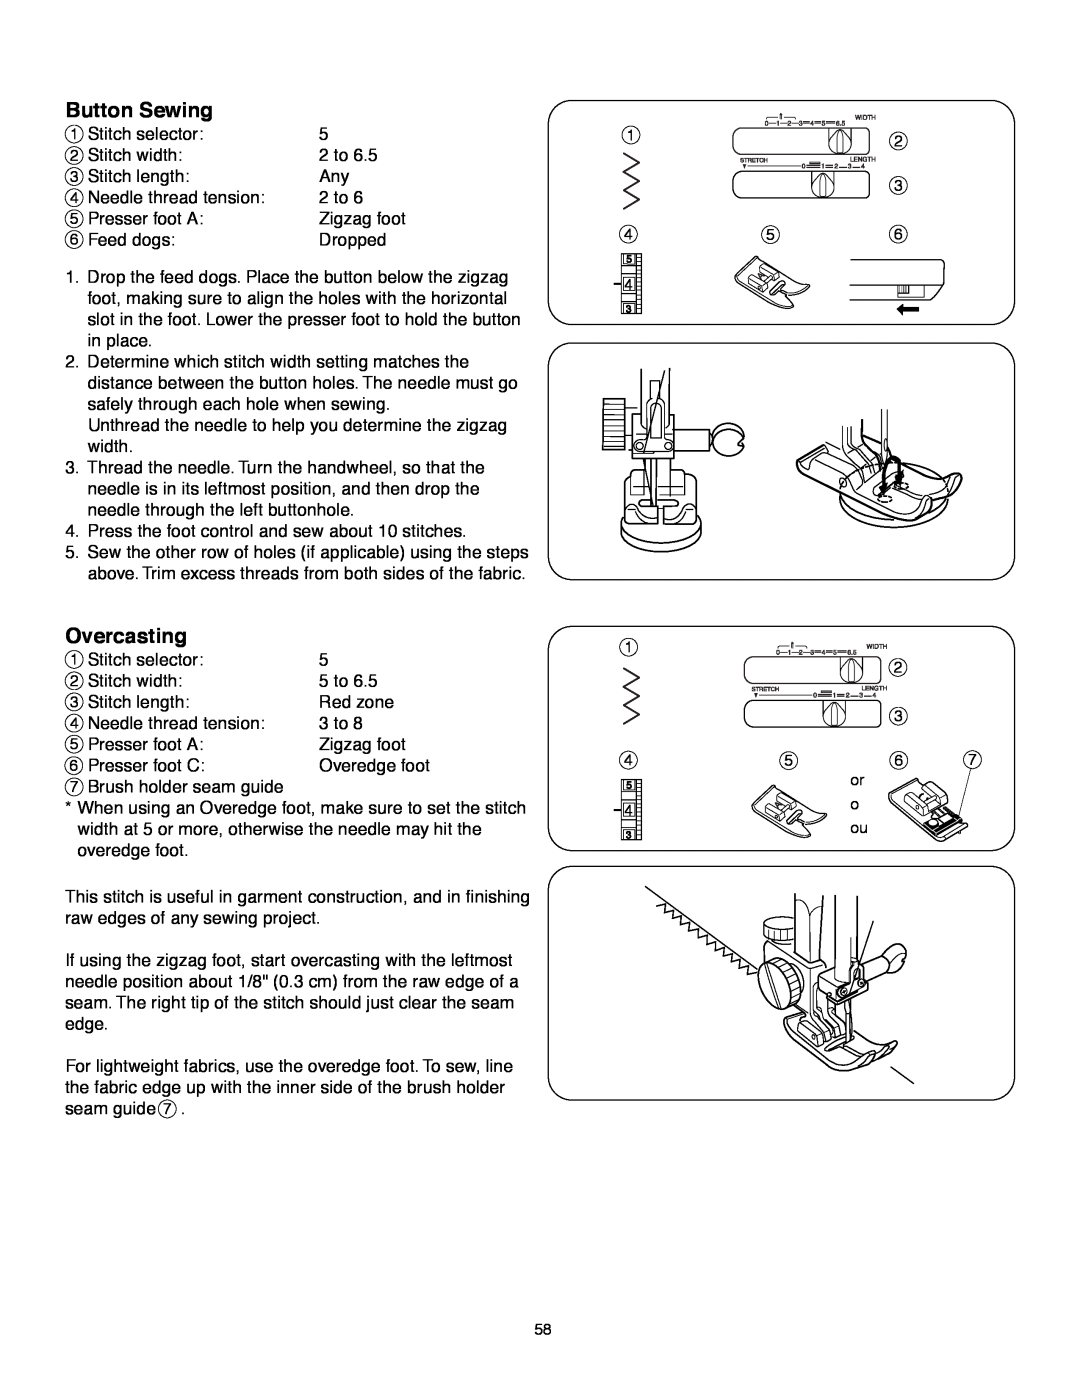 Janome MS-5027 instruction manual Button Sewing, Overcasting 